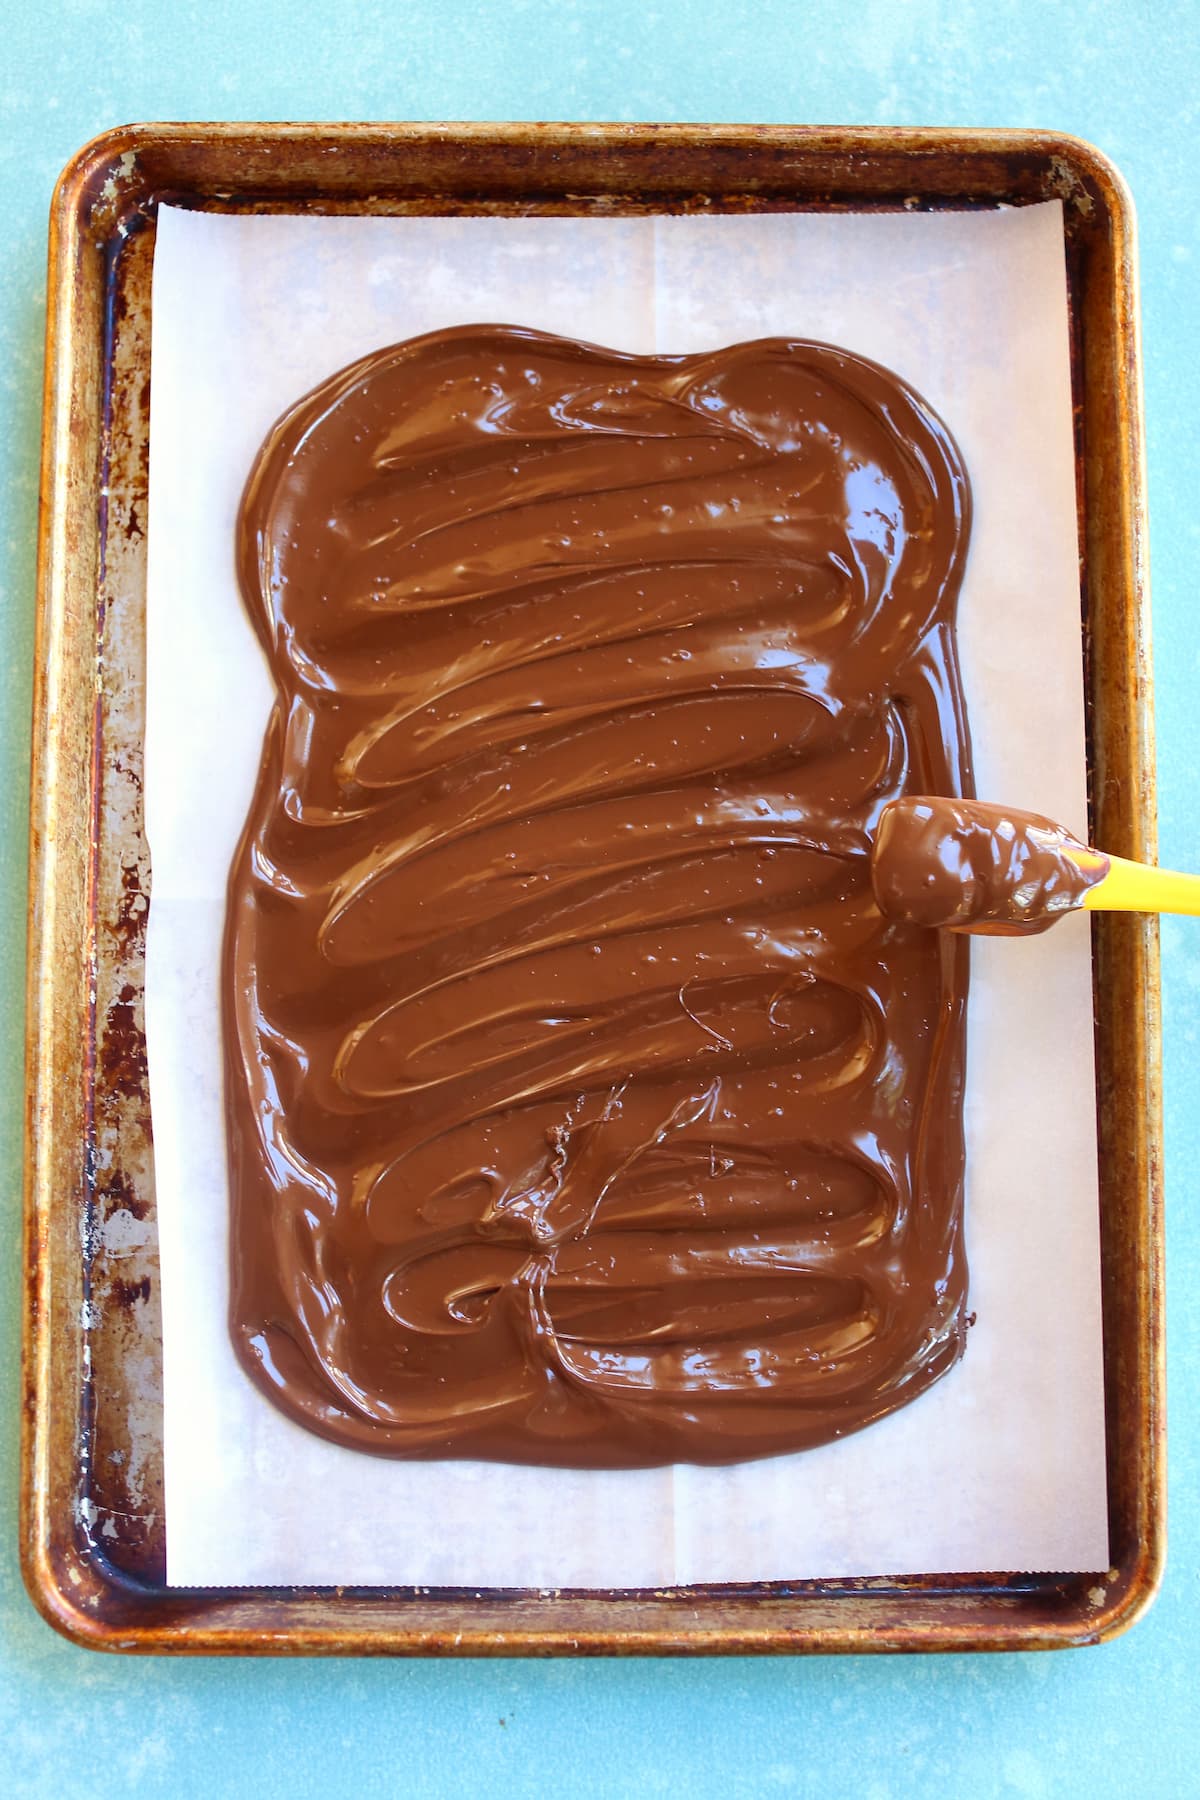 a tray of melted chocolate.